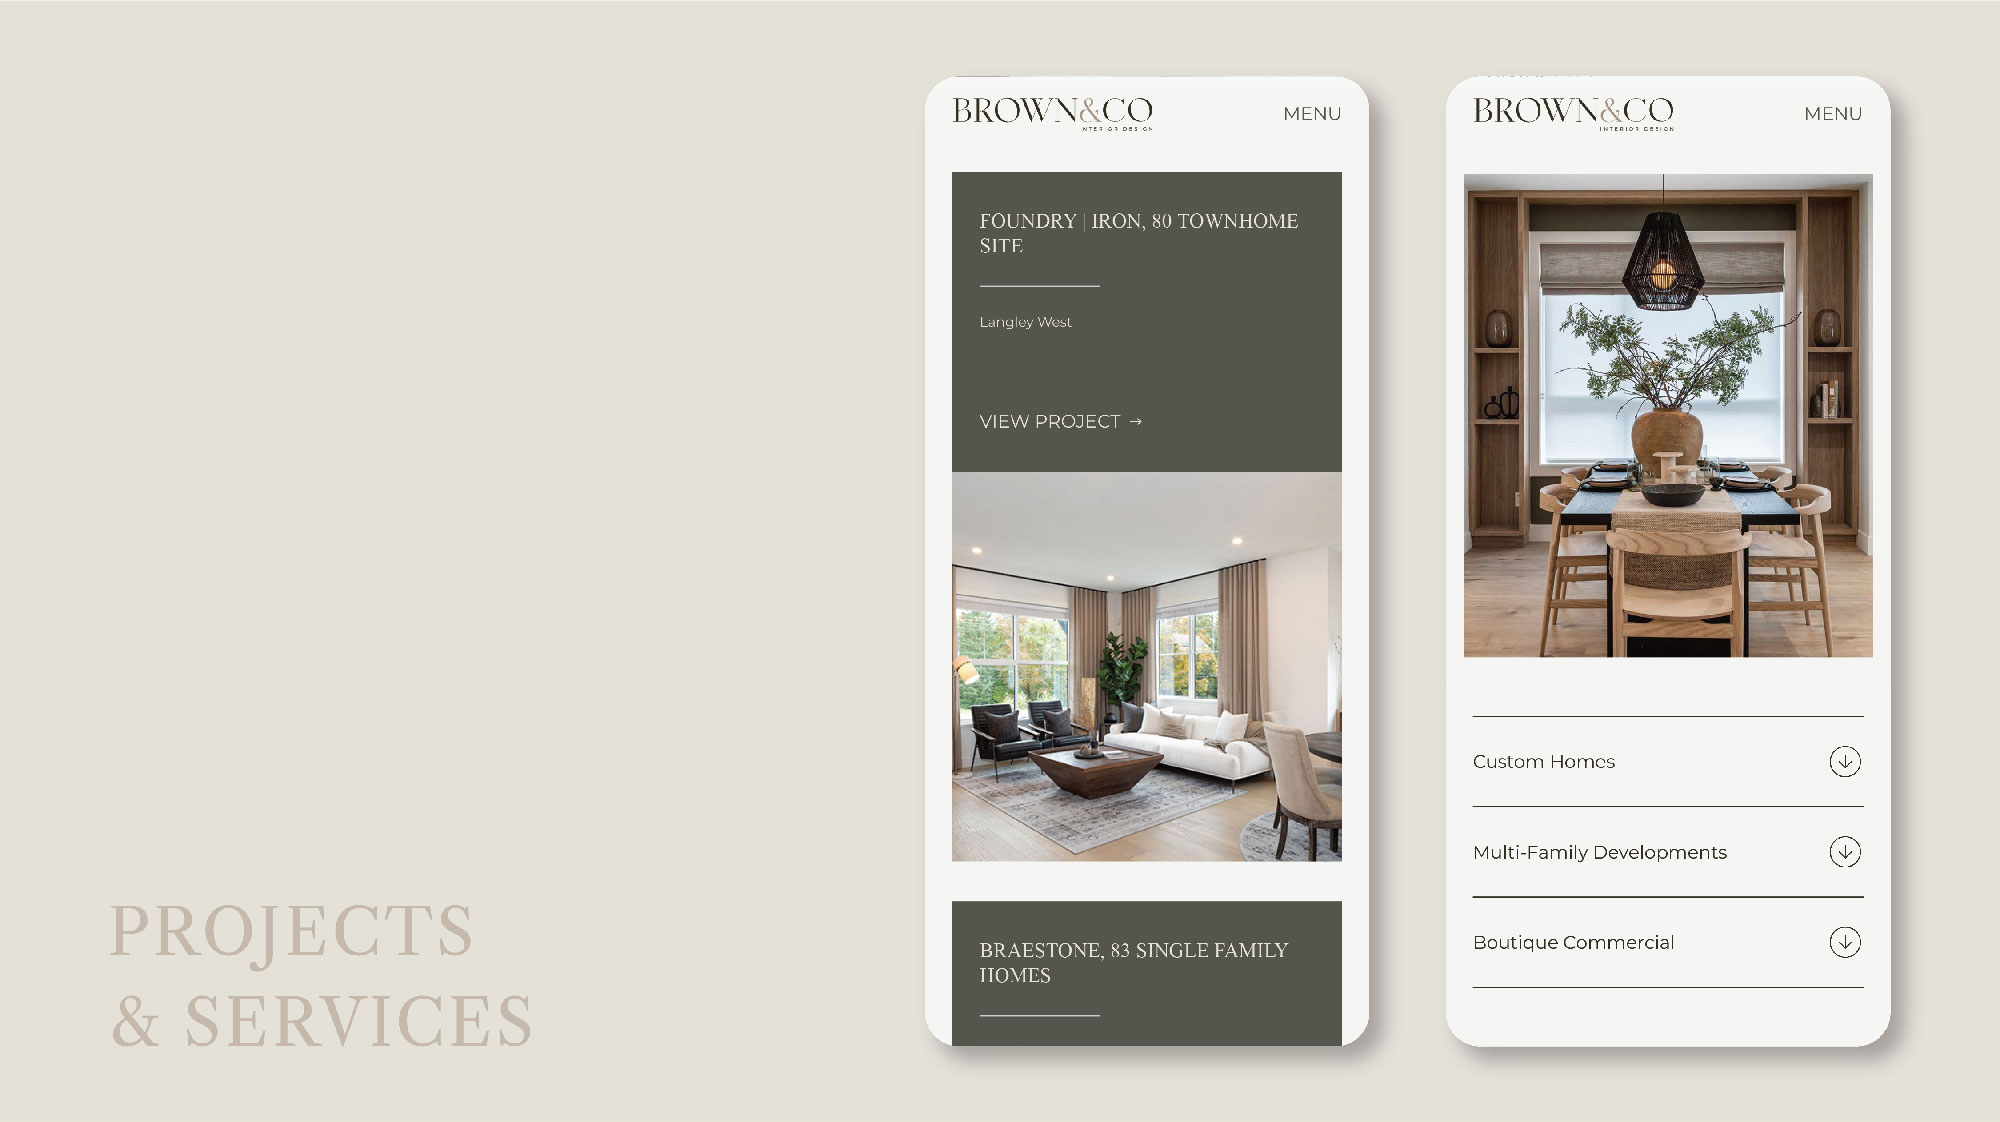 Brown&Co website design mobile phone view – by White Canvas Design